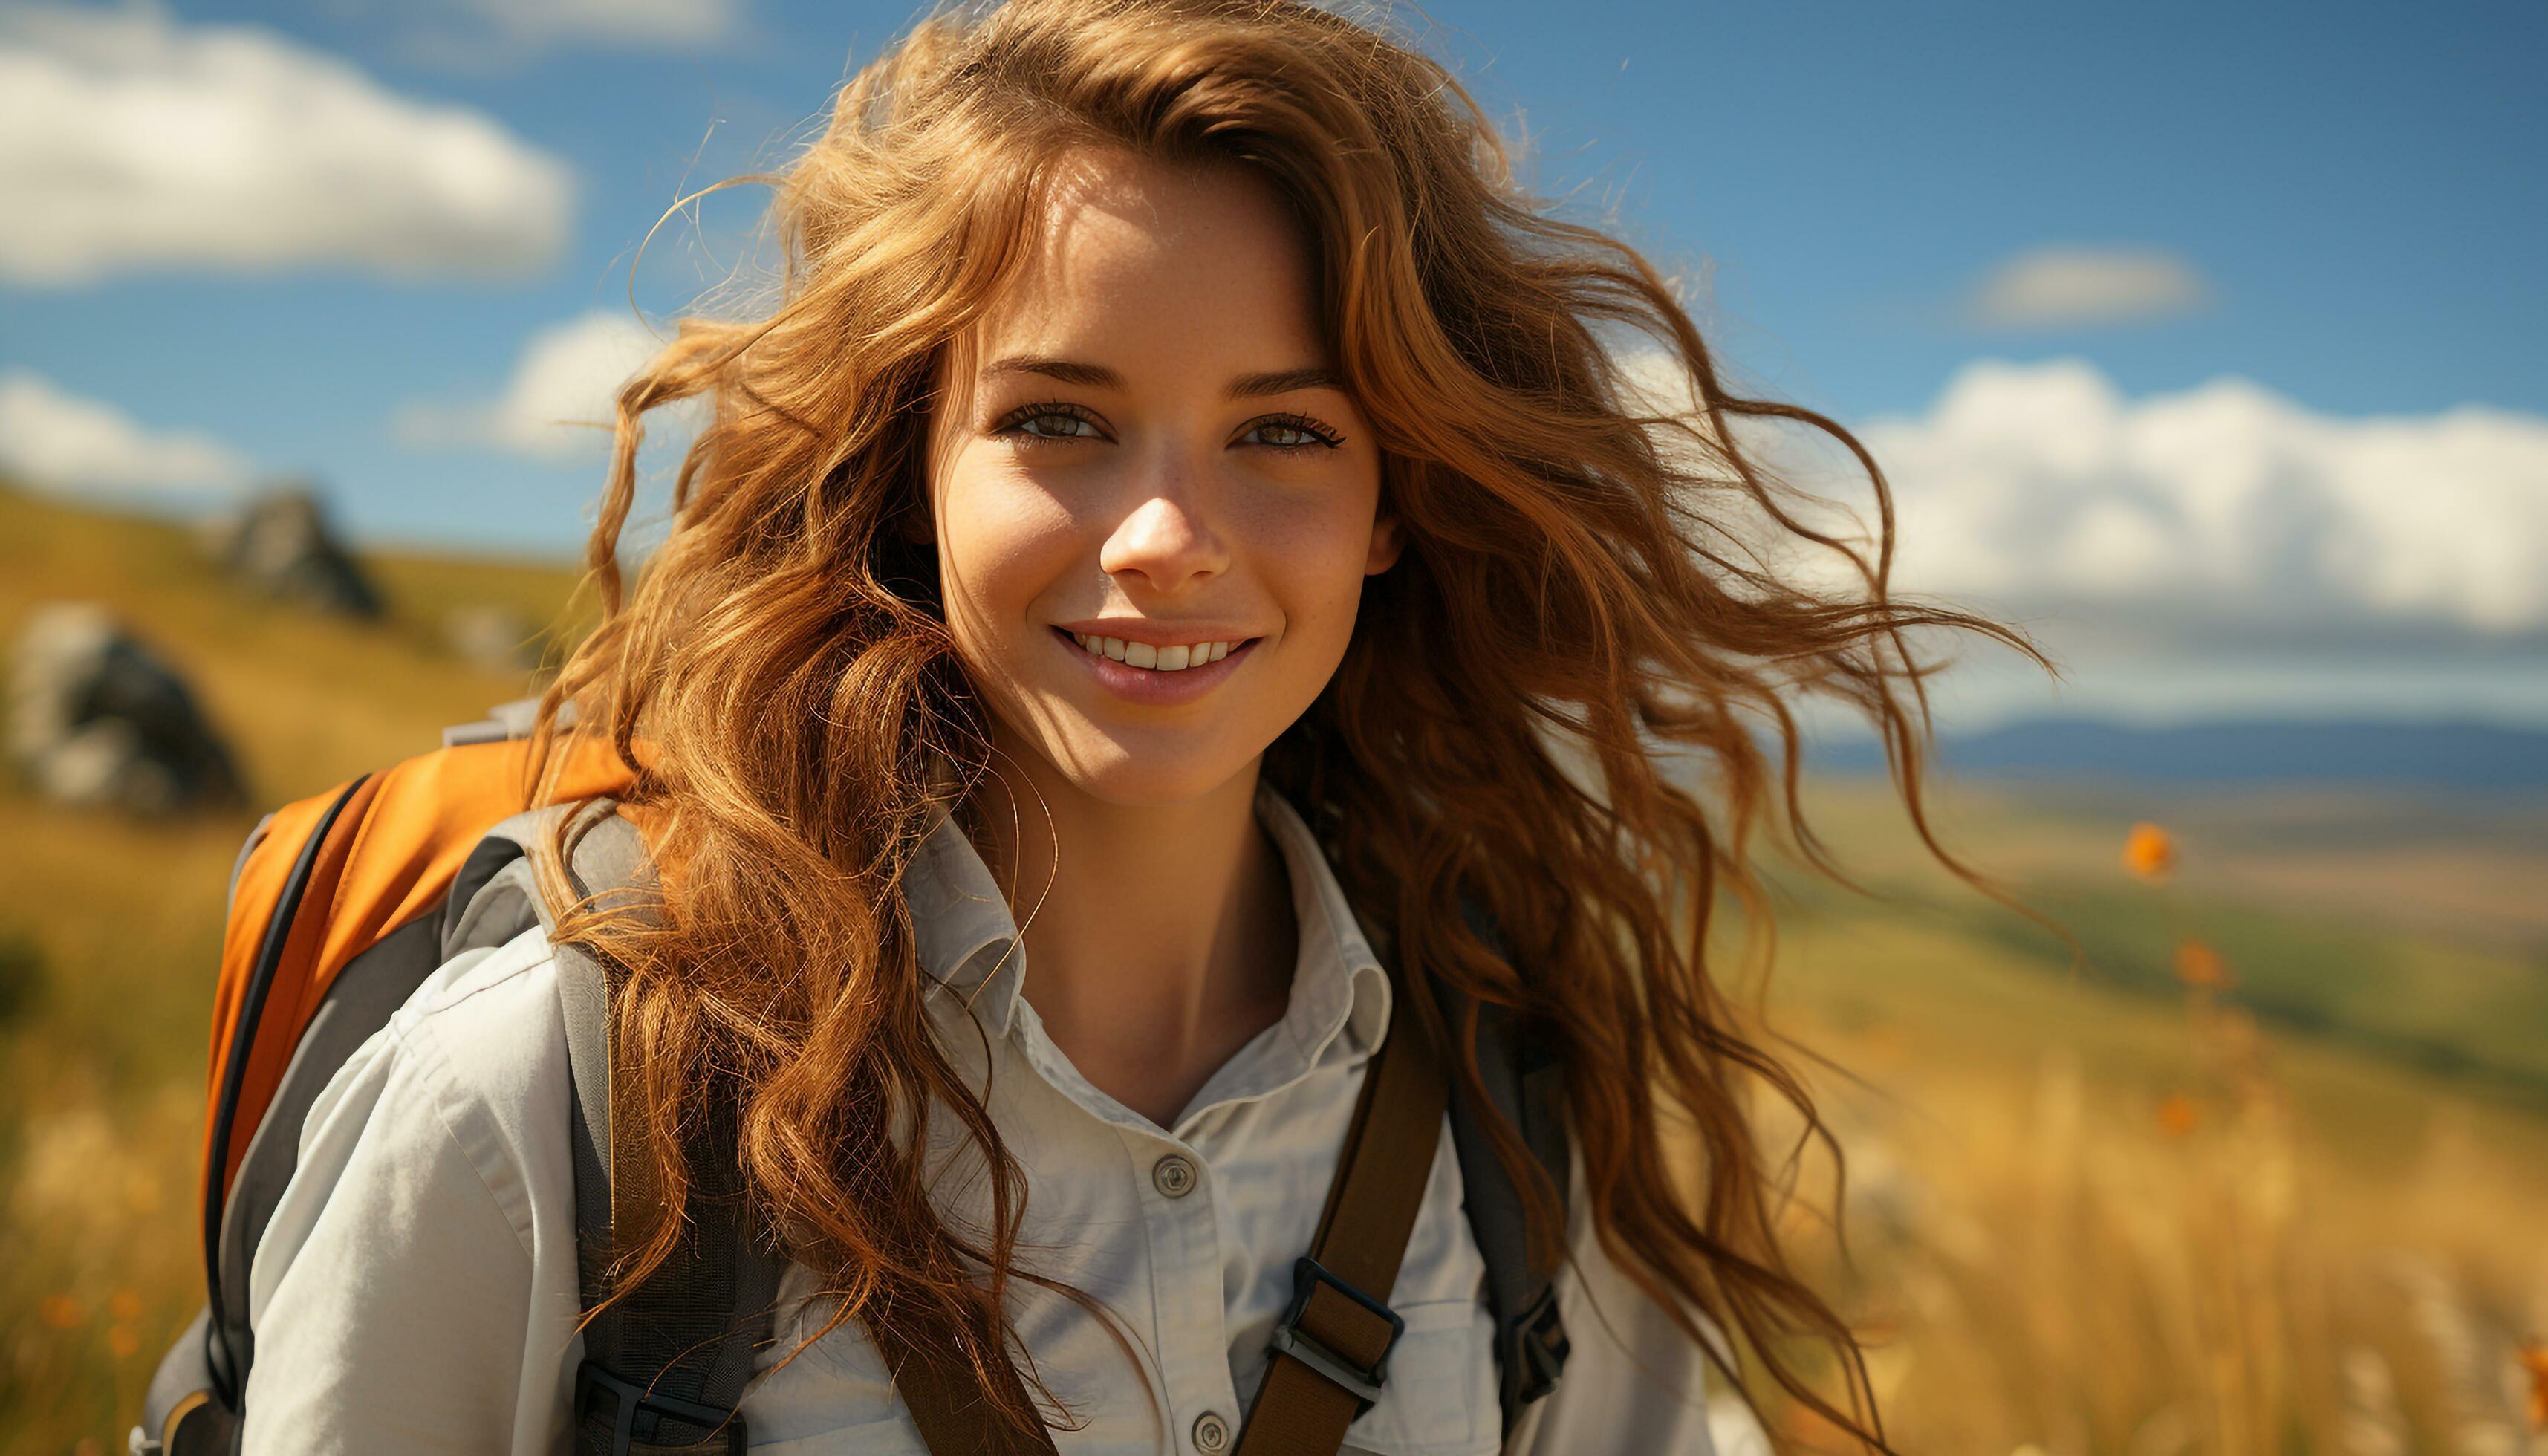 Young woman hiking in the mountains, smiling, enjoying nature beauty ...